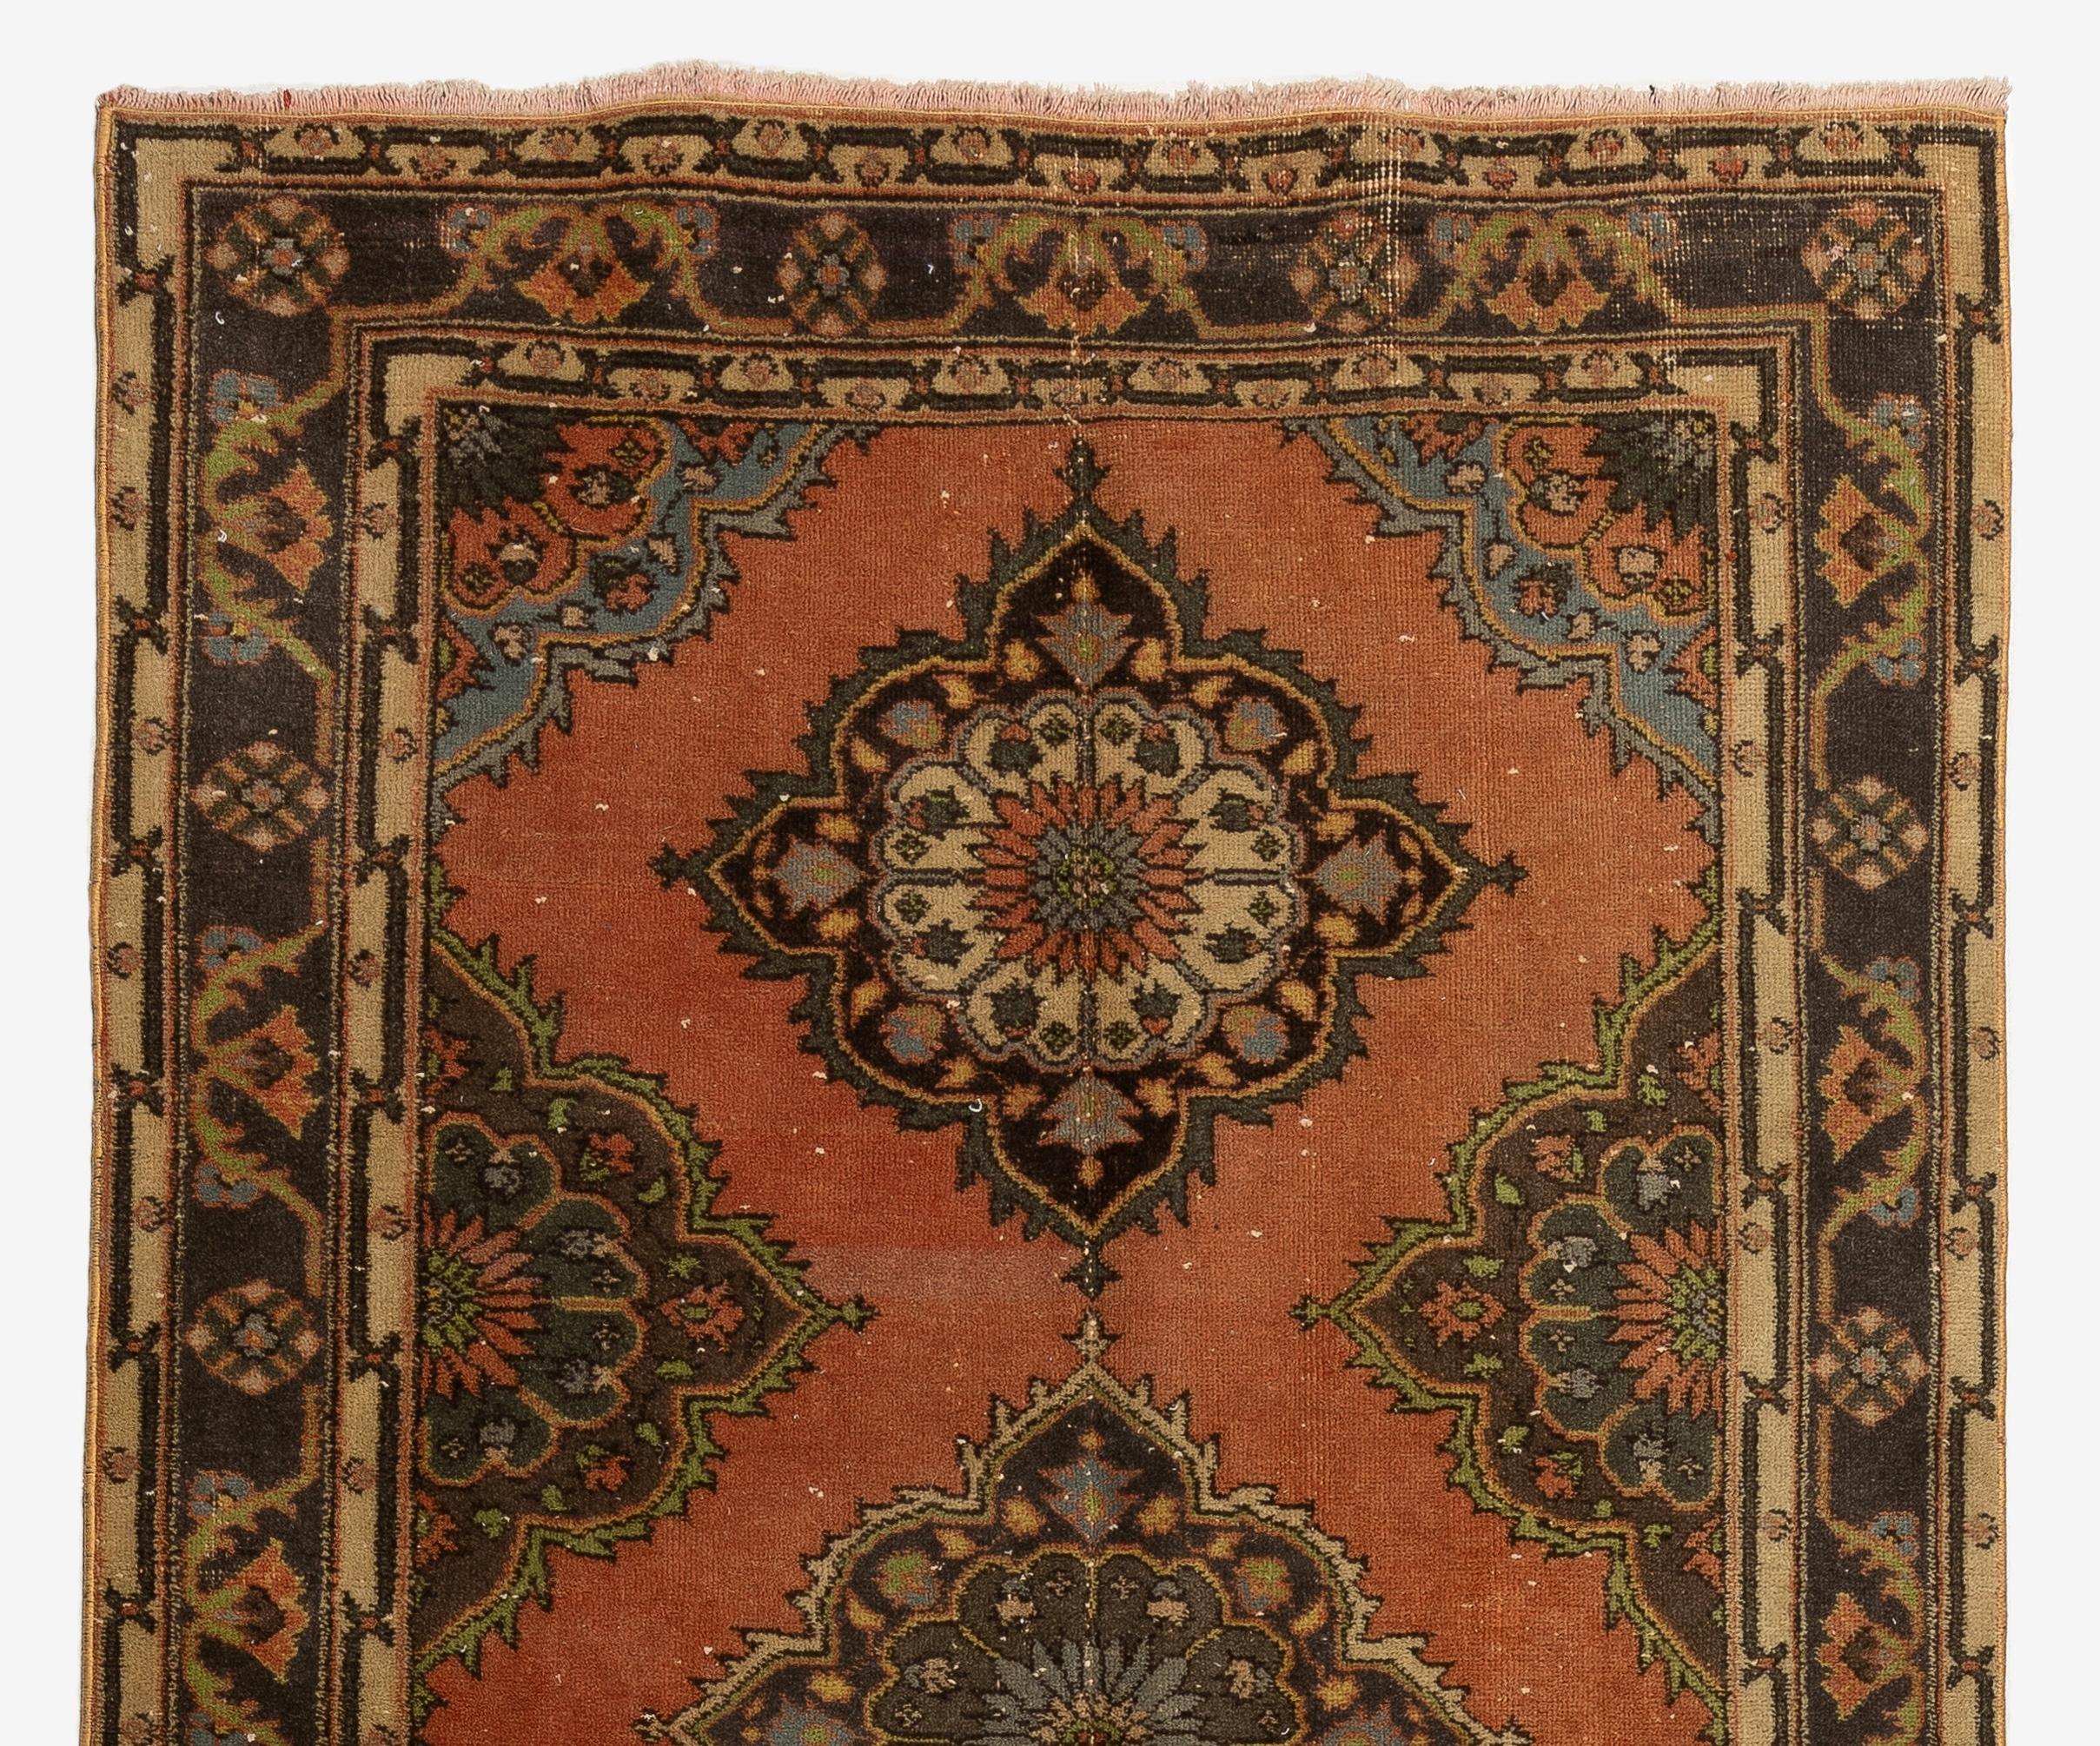 A vintage Turkish runner rug in red, brown and beige. It was hand-knotted in the 1960s with low wool on cotton foundation and features a multiple medallion design. It is in very good condition, professionally-washed, sturdy and suitable for areas